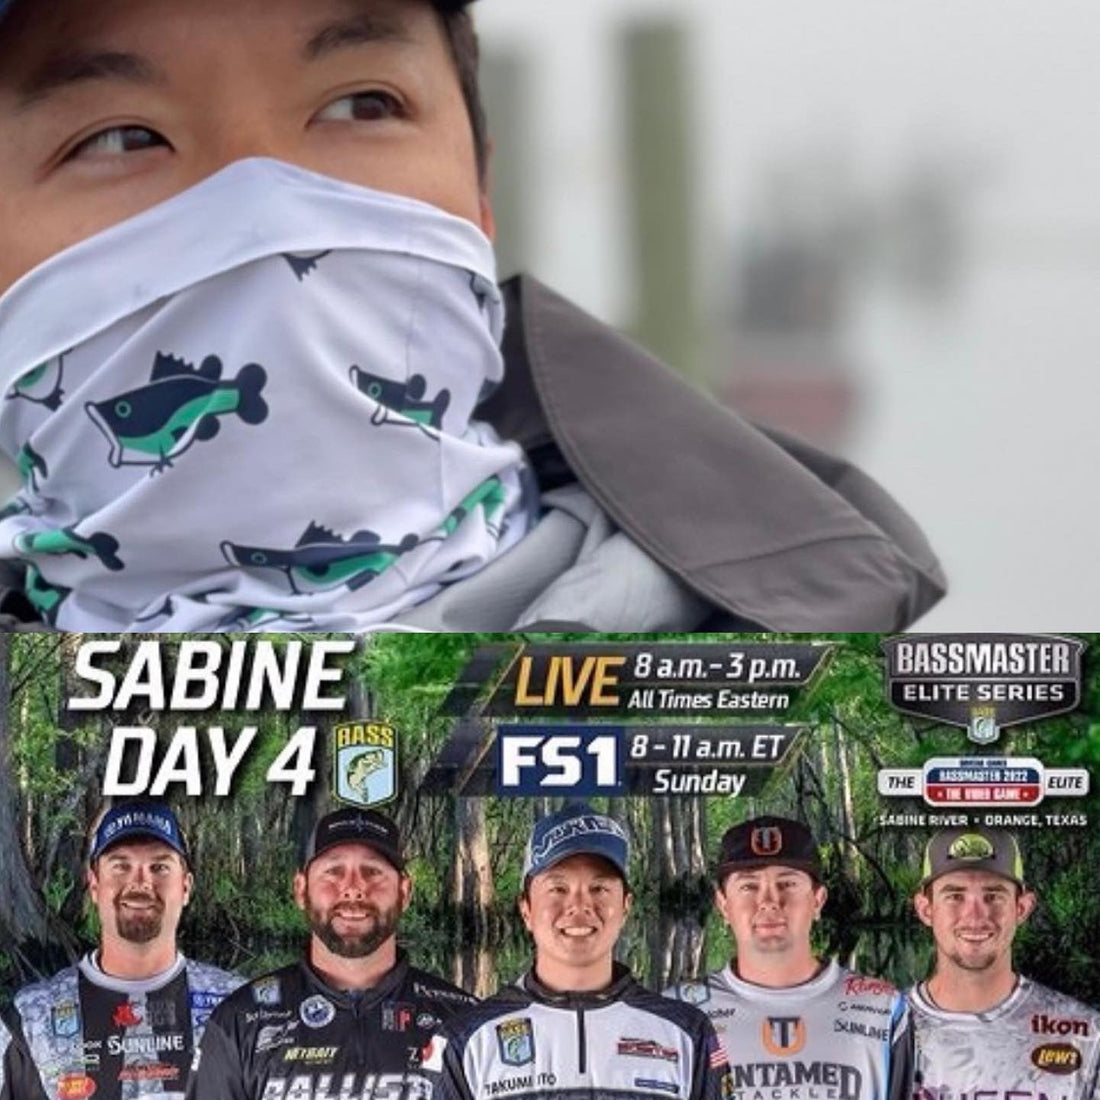 Tune in to Bassmaster.com and cheer Taku to Victory!